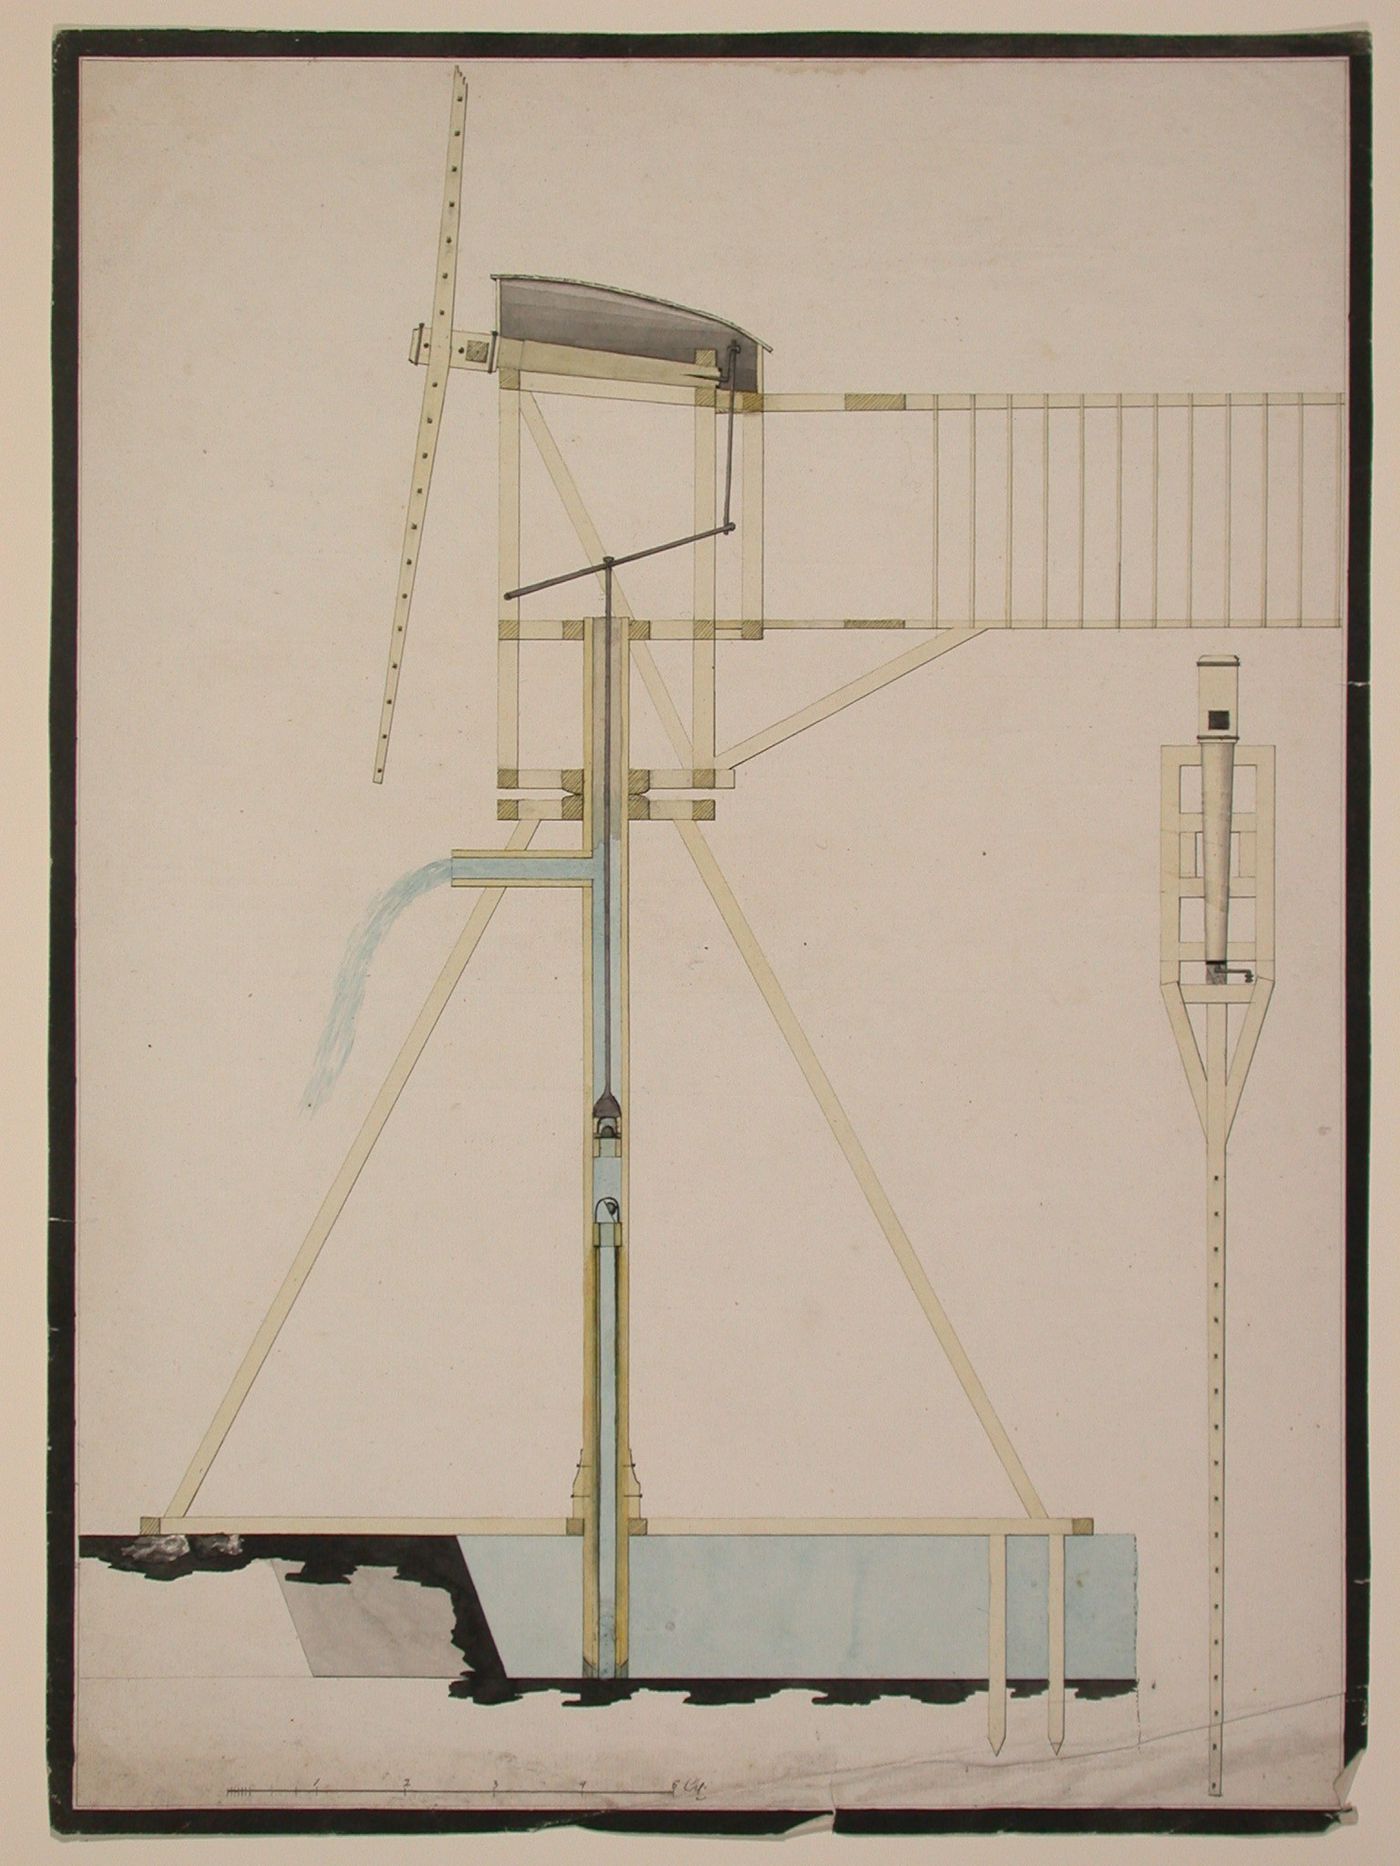 Design for a wind-driven water pump